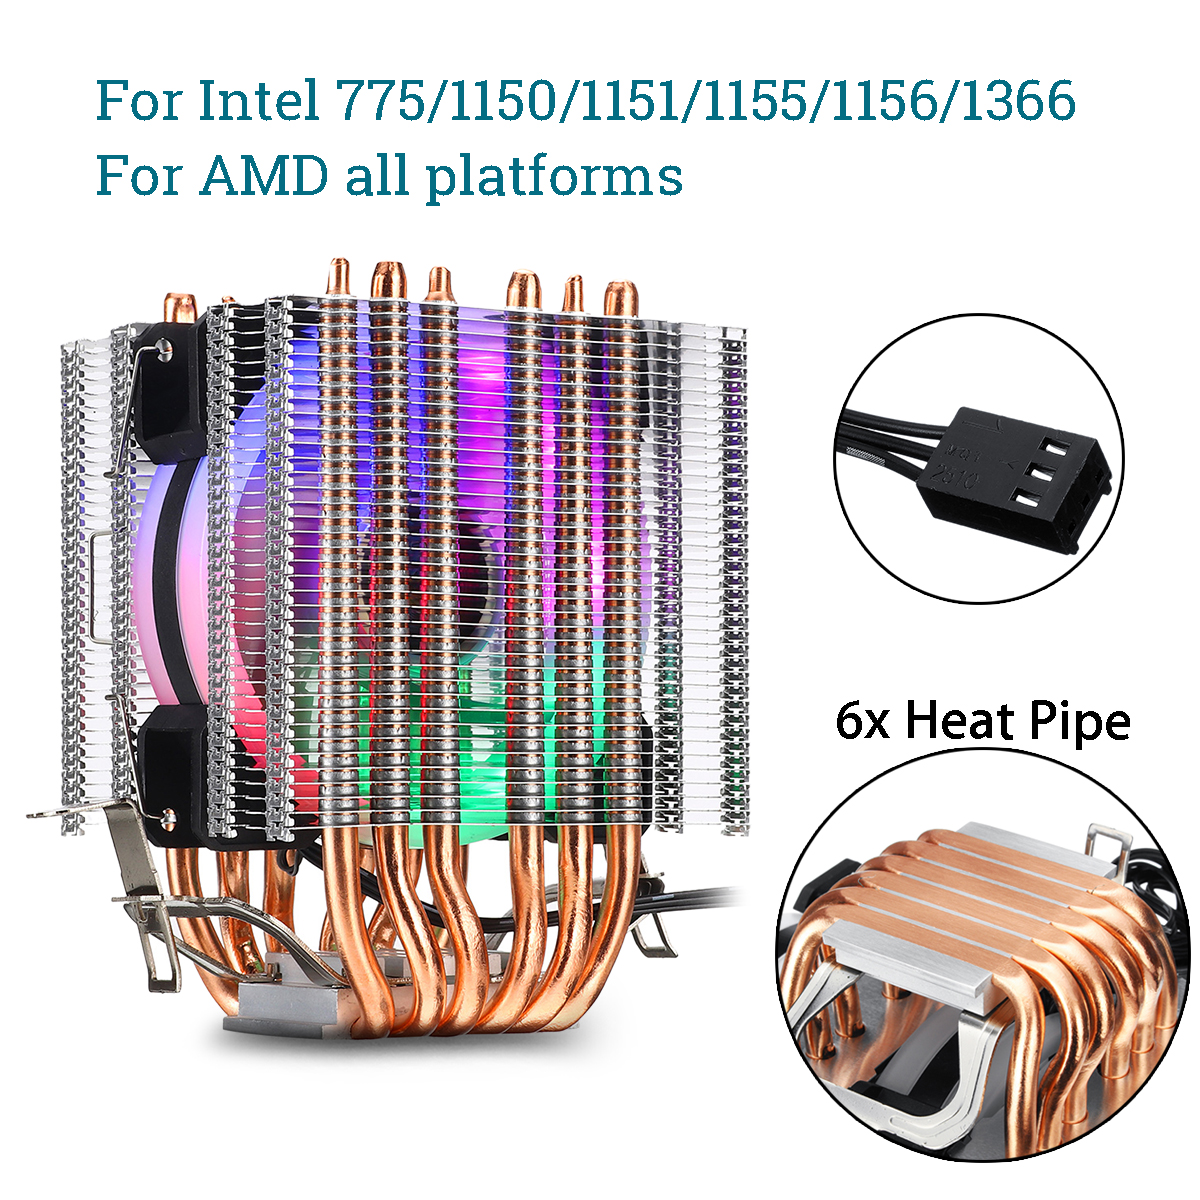 3 Pin CPU Cooler Cooling Fan Heatsink for Intel 775/1150/1151/1155/1156/1366 and AMD All Platforms 5 Colors Lighting 13